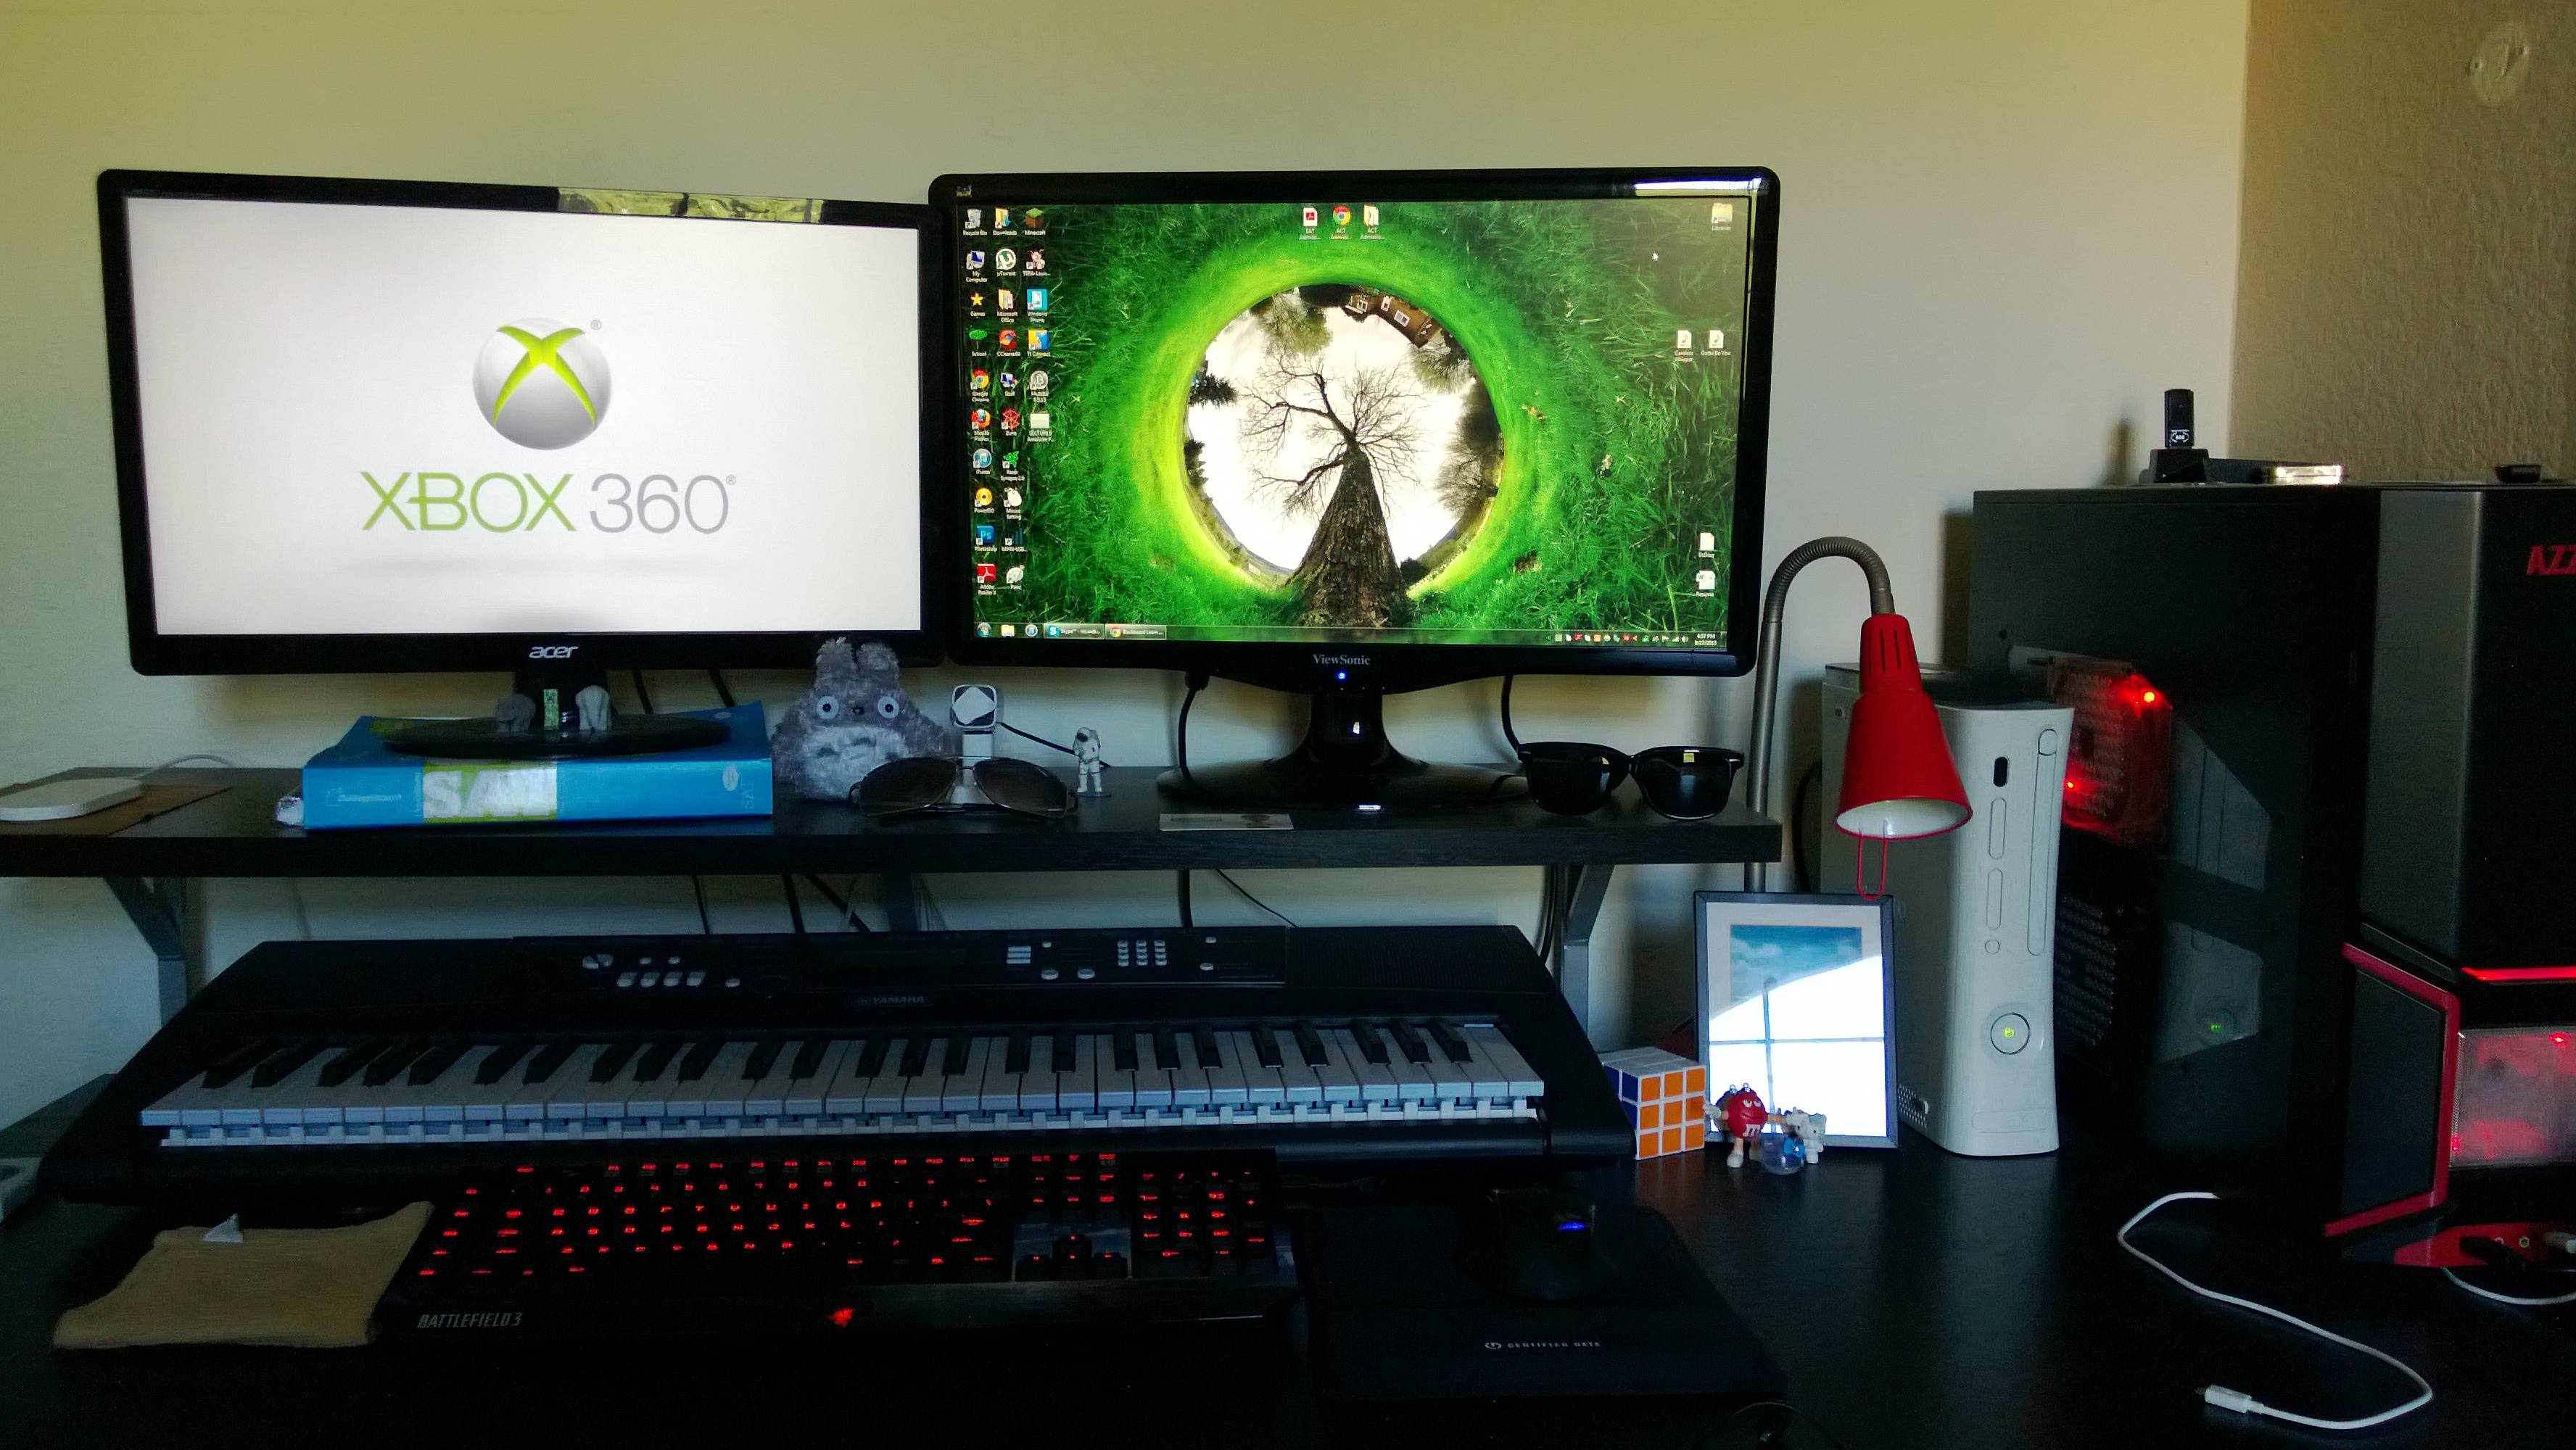 ergonomic How Much Is A Whole Gaming Pc Setup with Wall Mounted Monitor